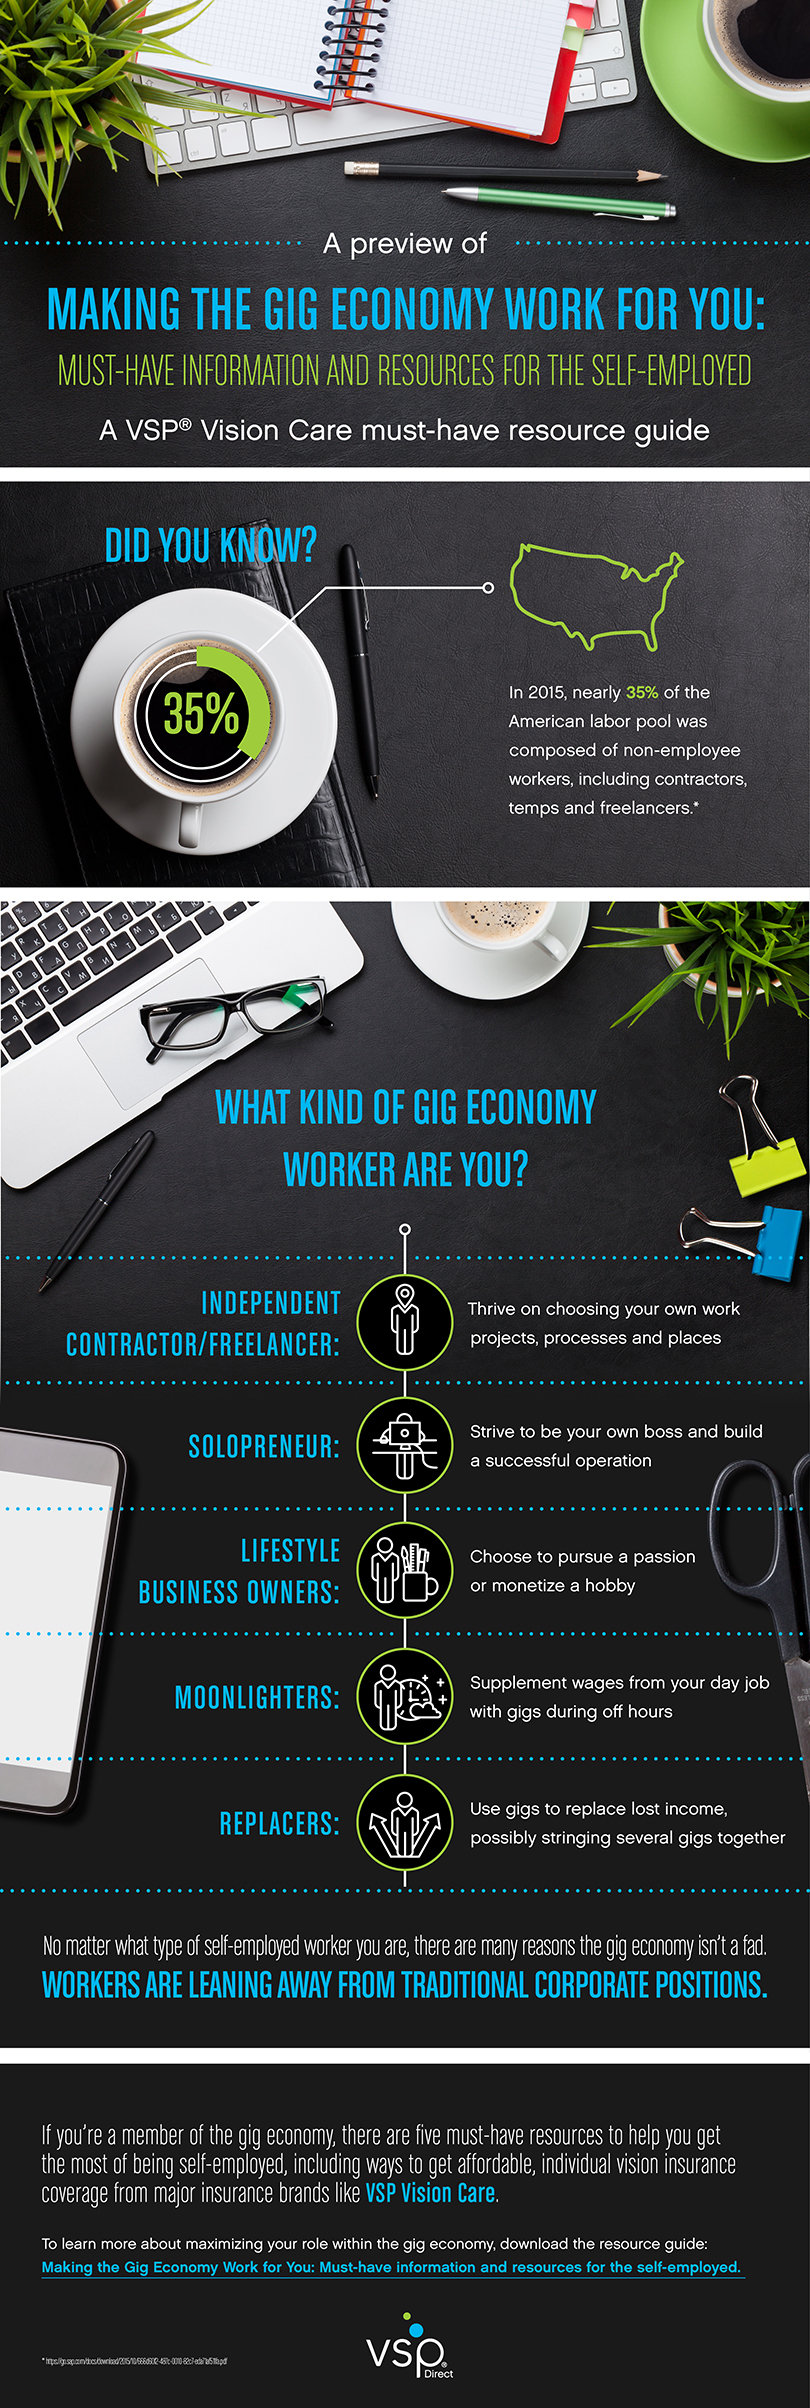 Gig economy infographic by VSP Vision Care